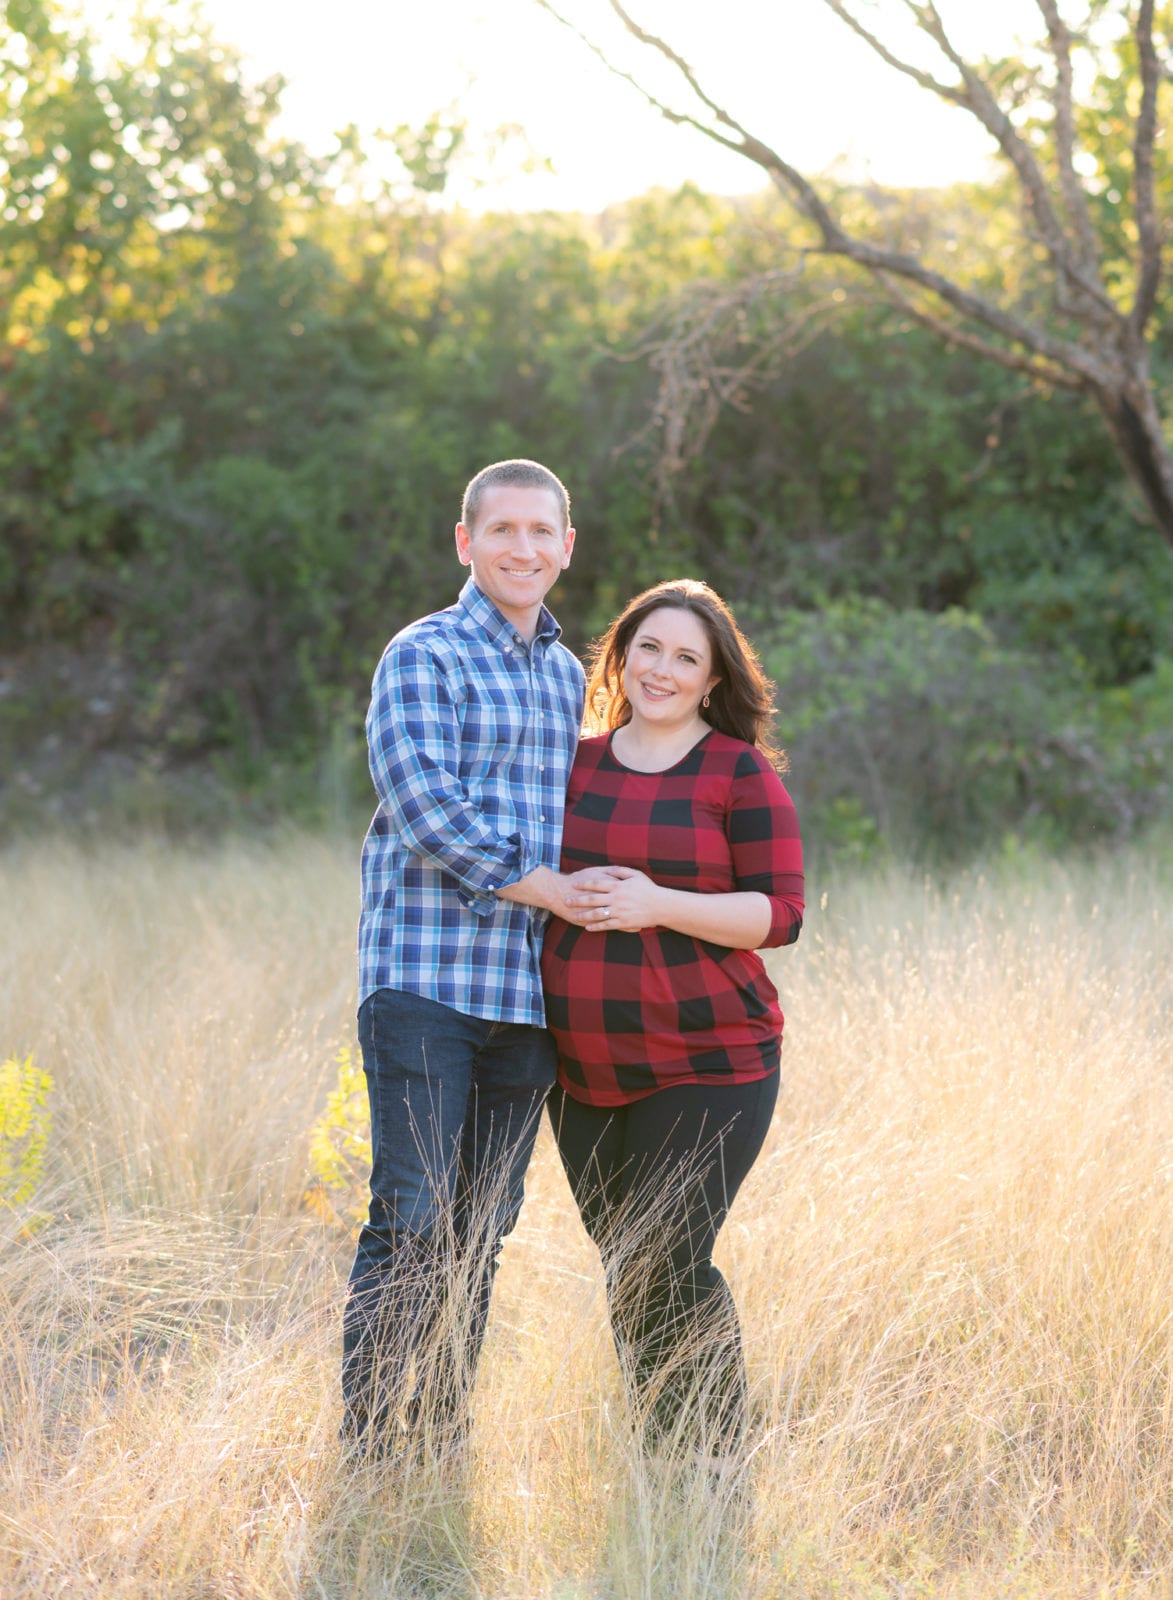 Maternity session in a field by Hello Photography